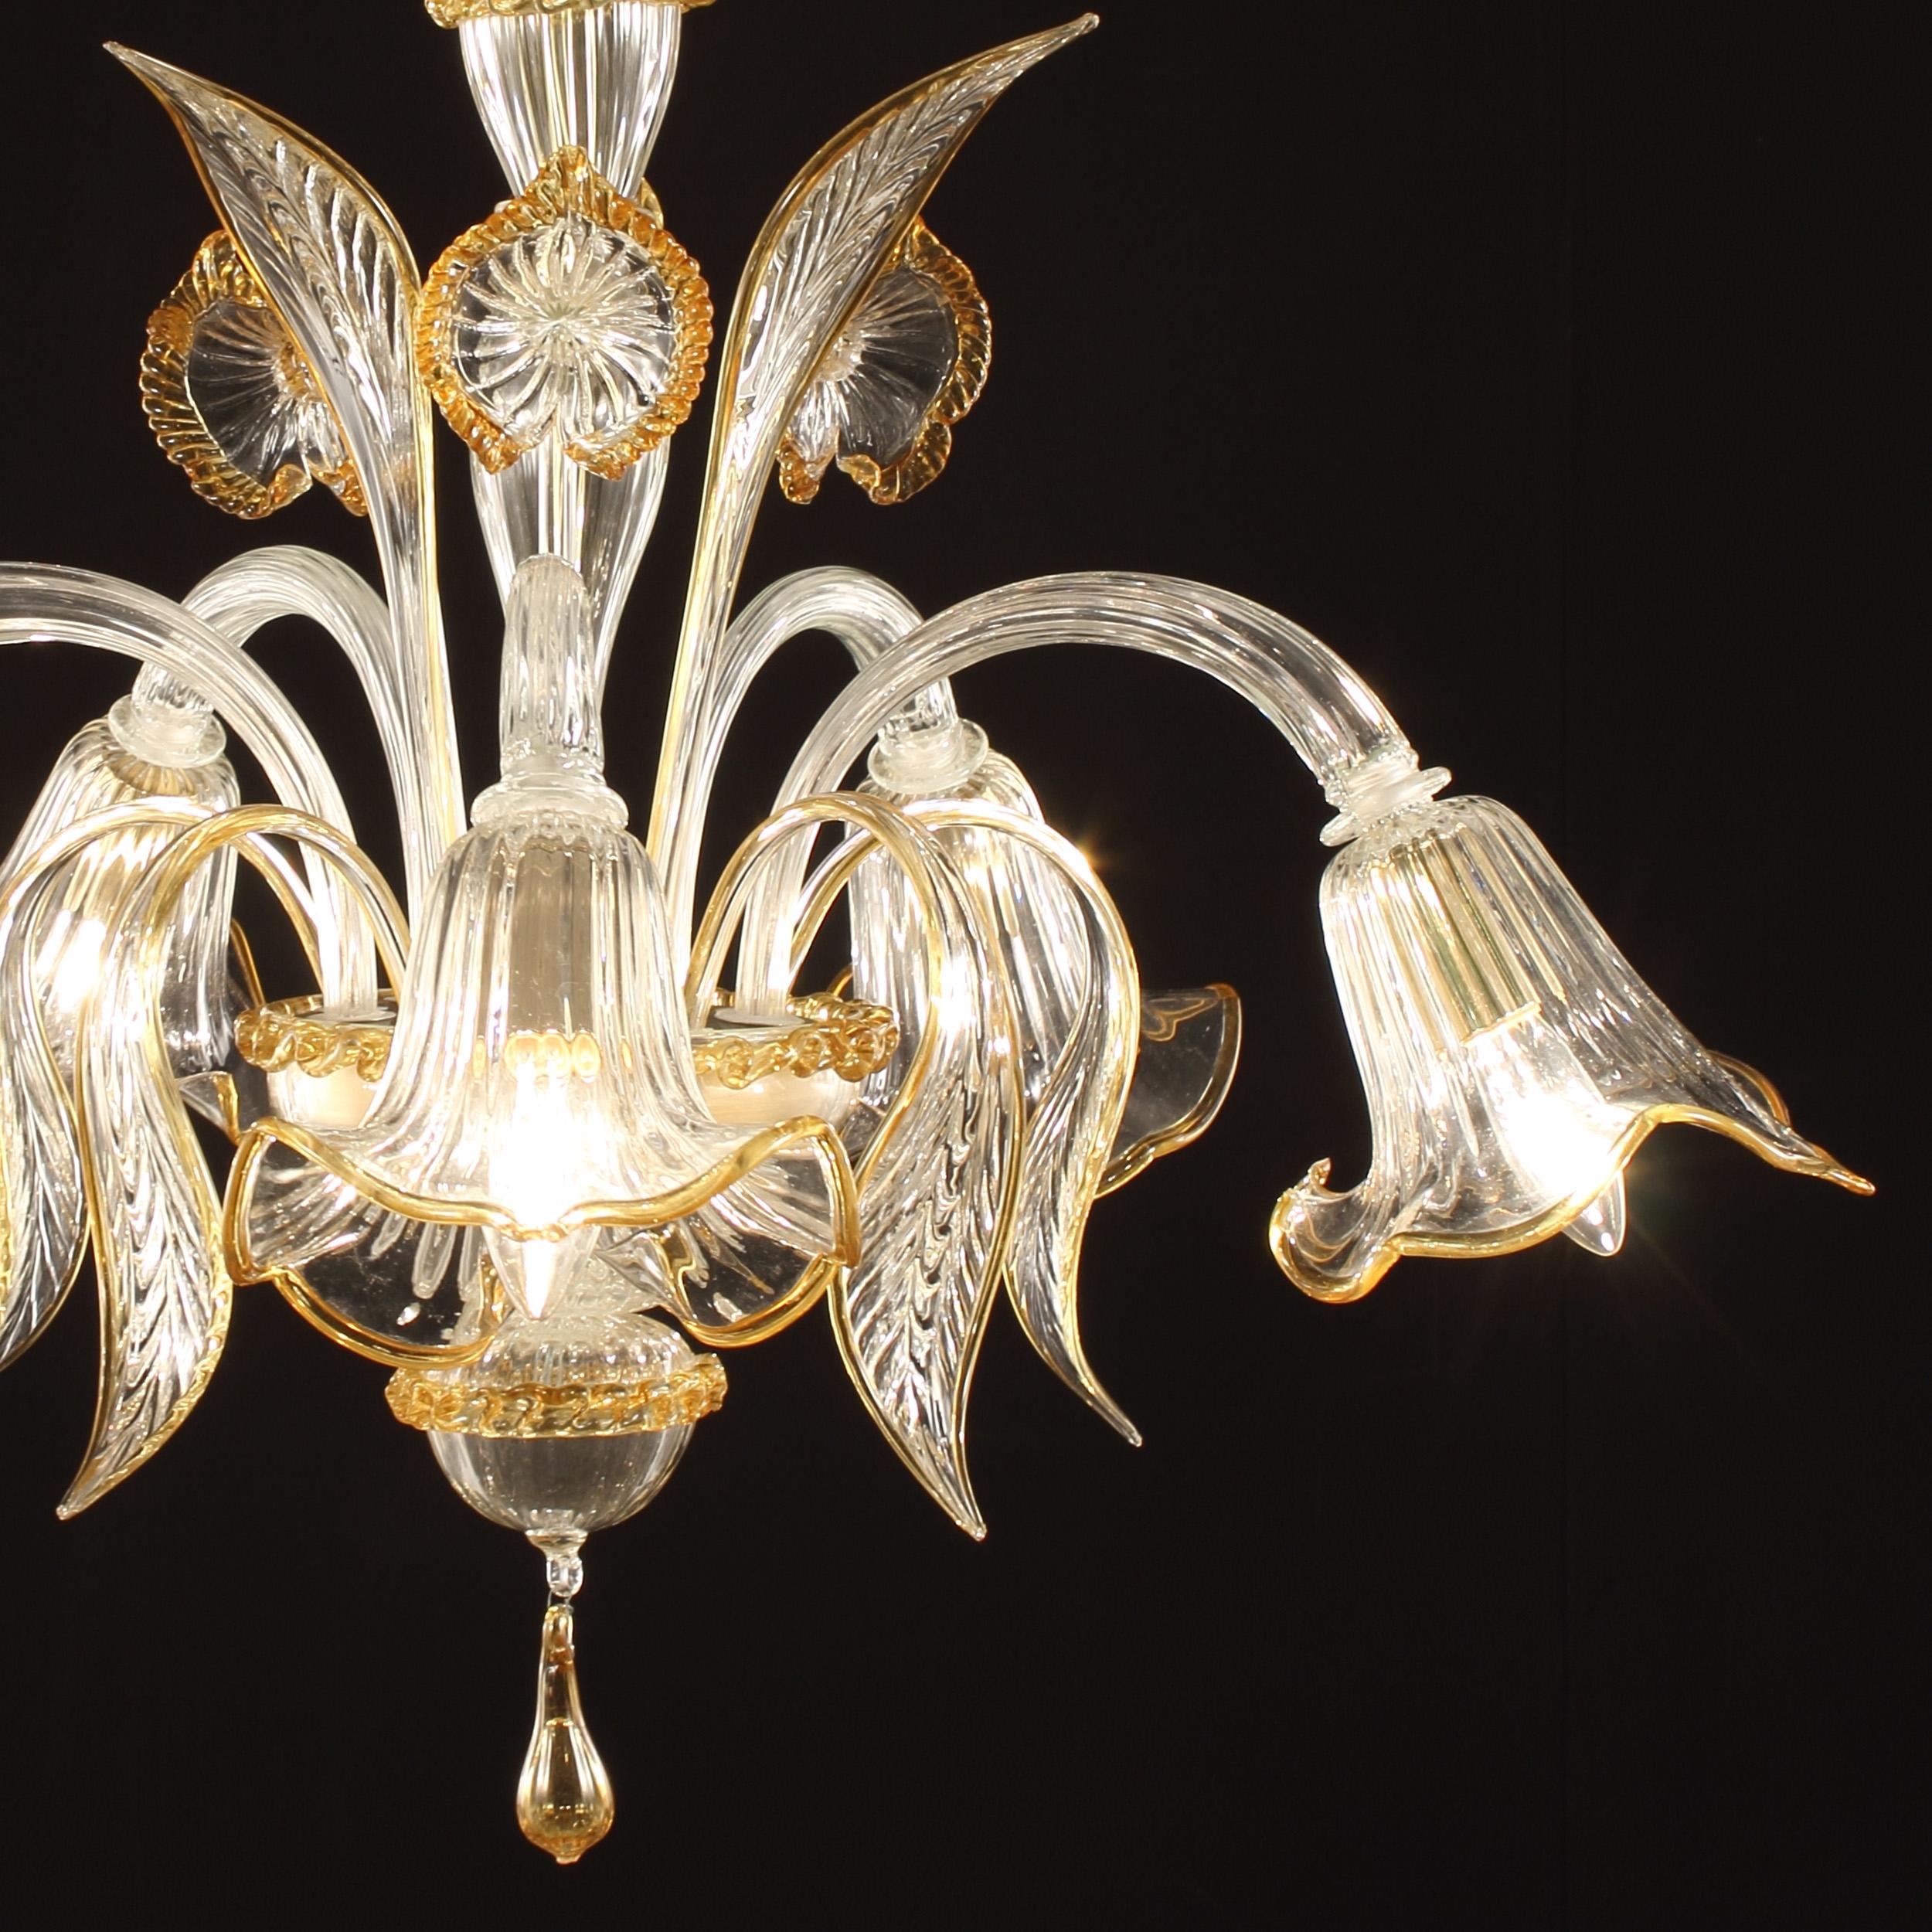 Artistic Chandelier 5 arms, Clear Murano Glass Amber Details by Multiforme For Sale 1